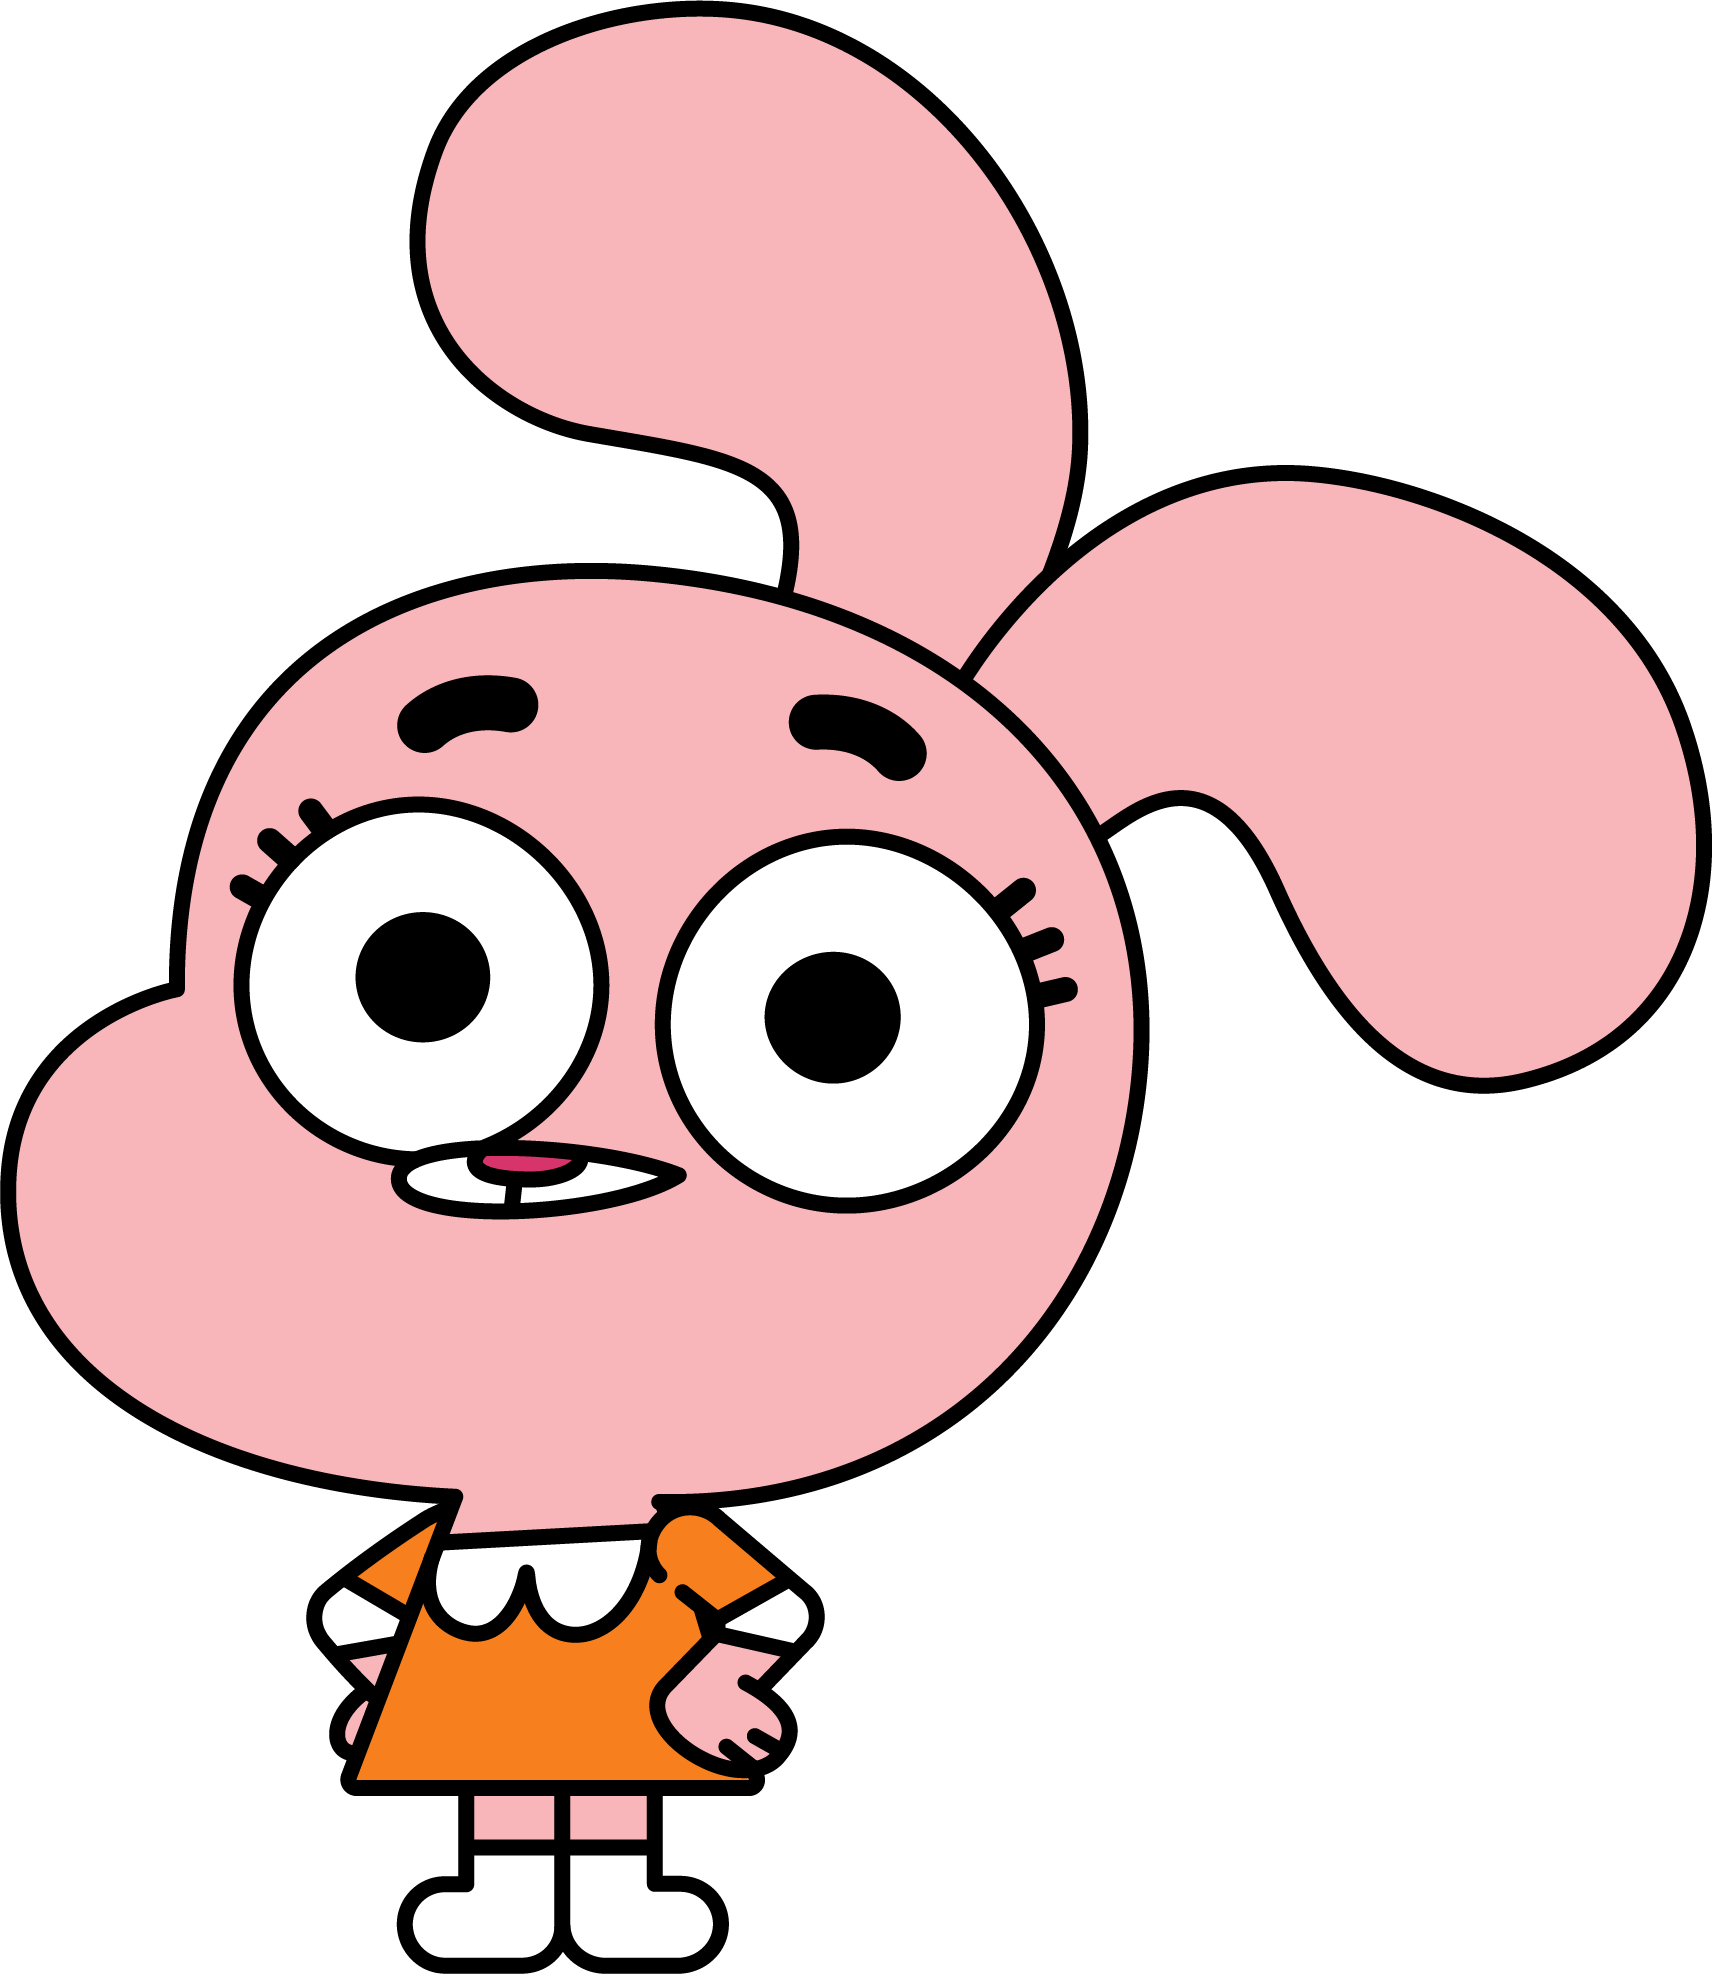 Anais Watterson. The Amazing World of Gumball. The amazing world of gumball, World of gumball, Drawing cartoon characters